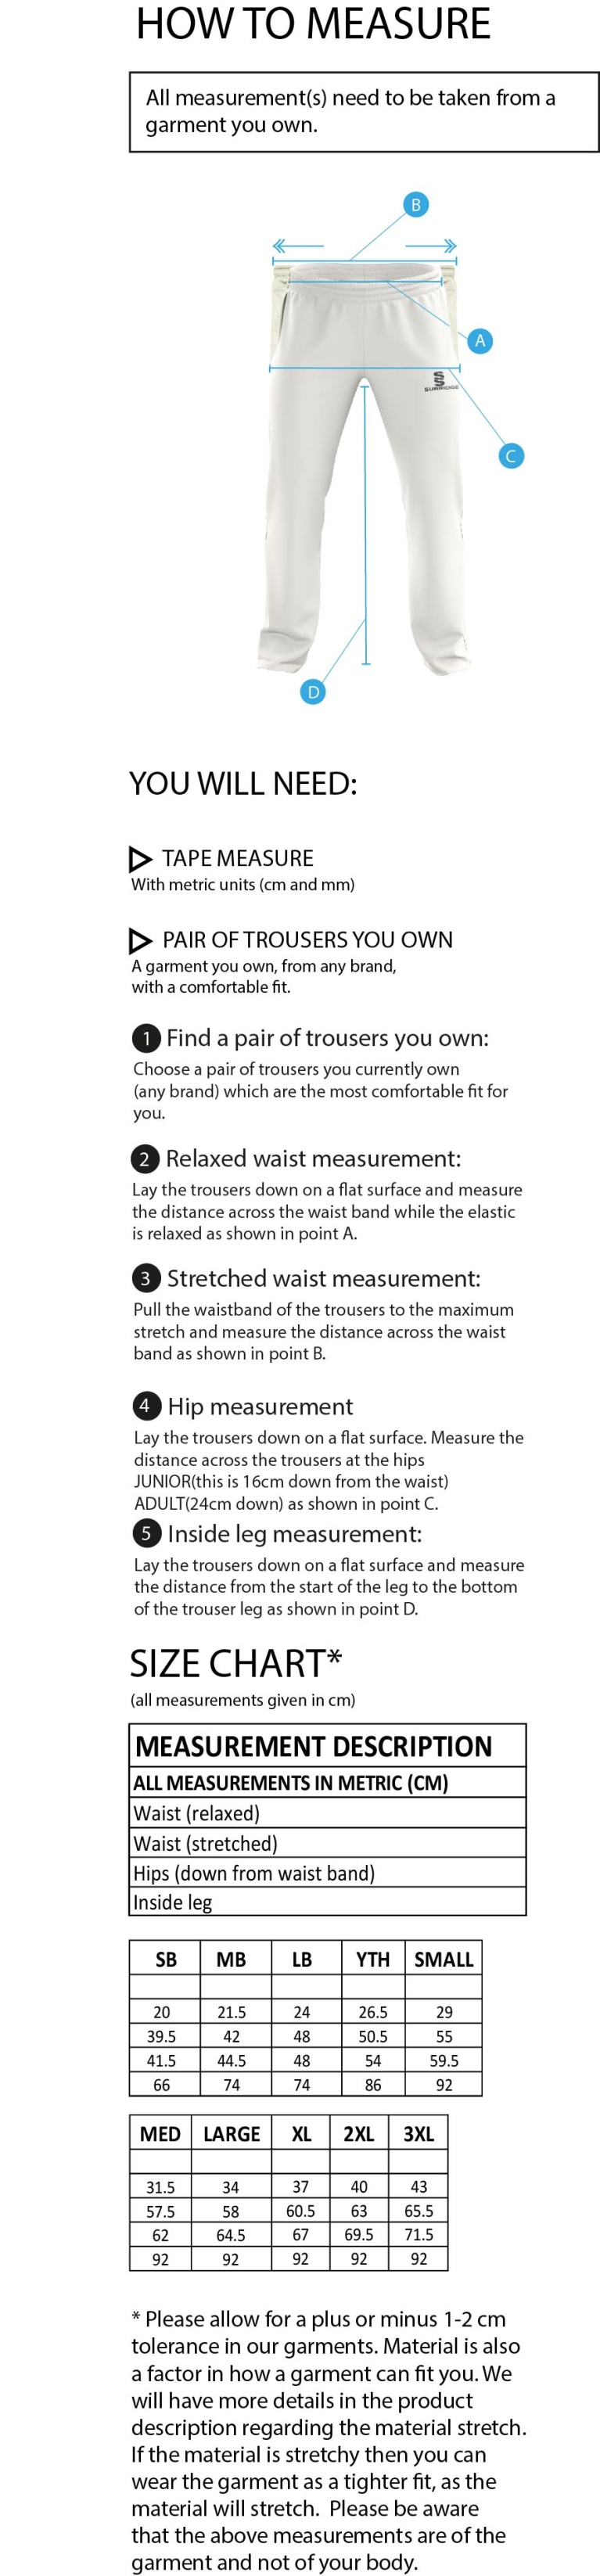 Durham College Society CC - Standard Playing Pant - Size Guide